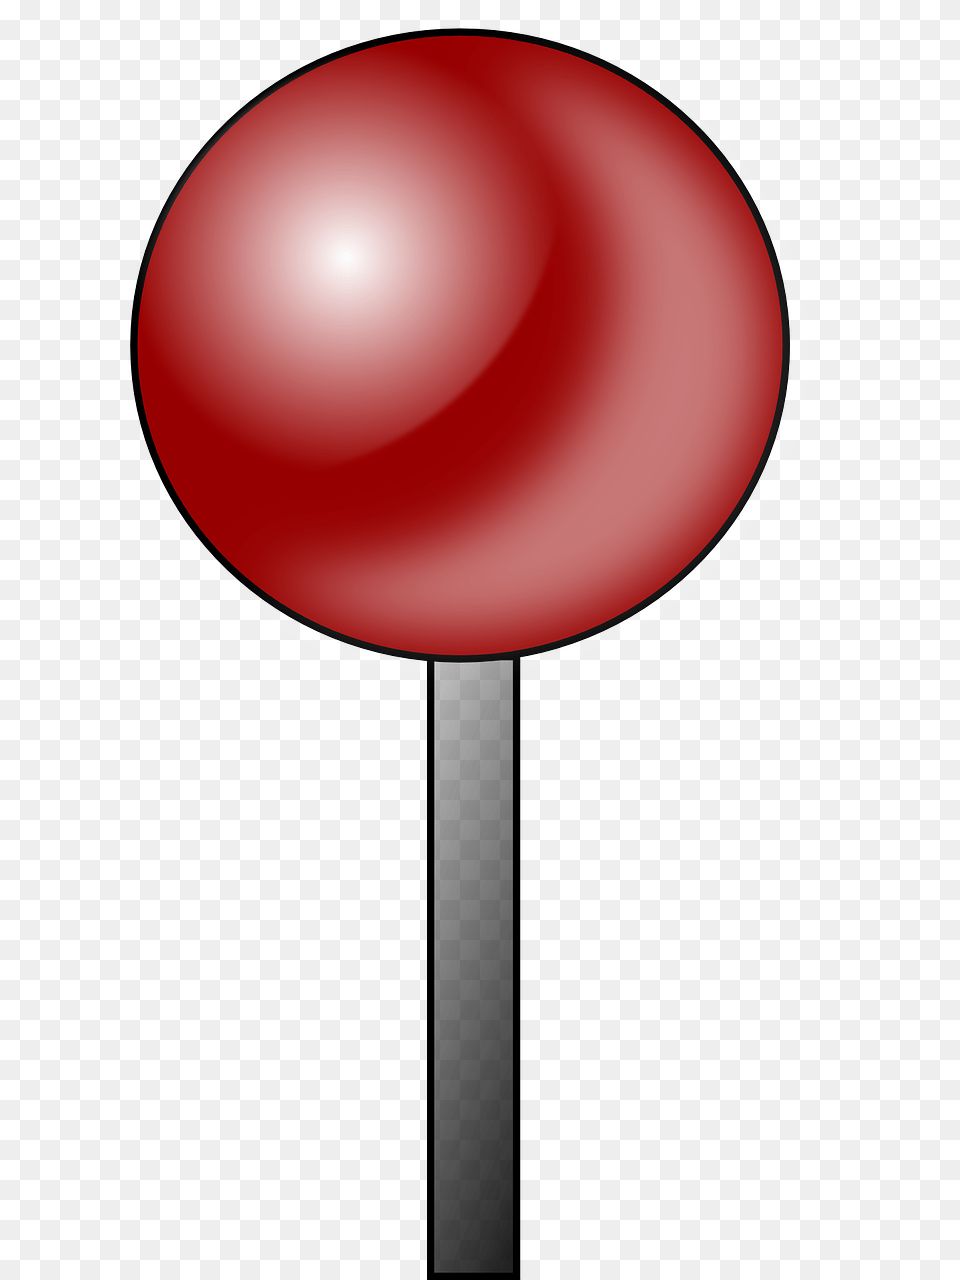 Lollipop Clip Art Candy Images On Clip Candies, Food, Sweets, Astronomy, Moon Free Png